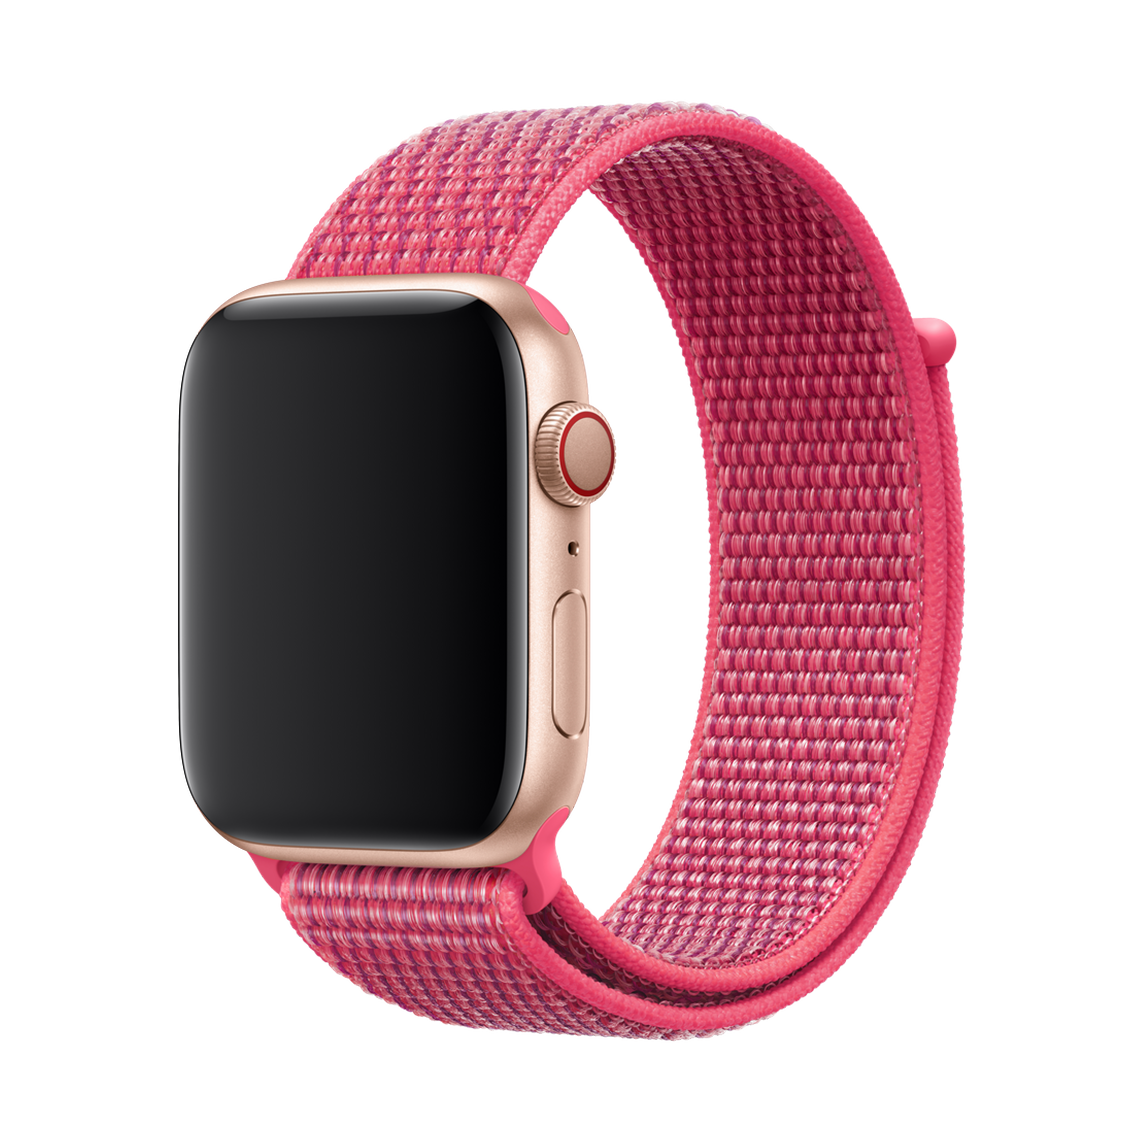 apple-watch-series-7-midnight-aluminum-case-with-midnight-silicone-band